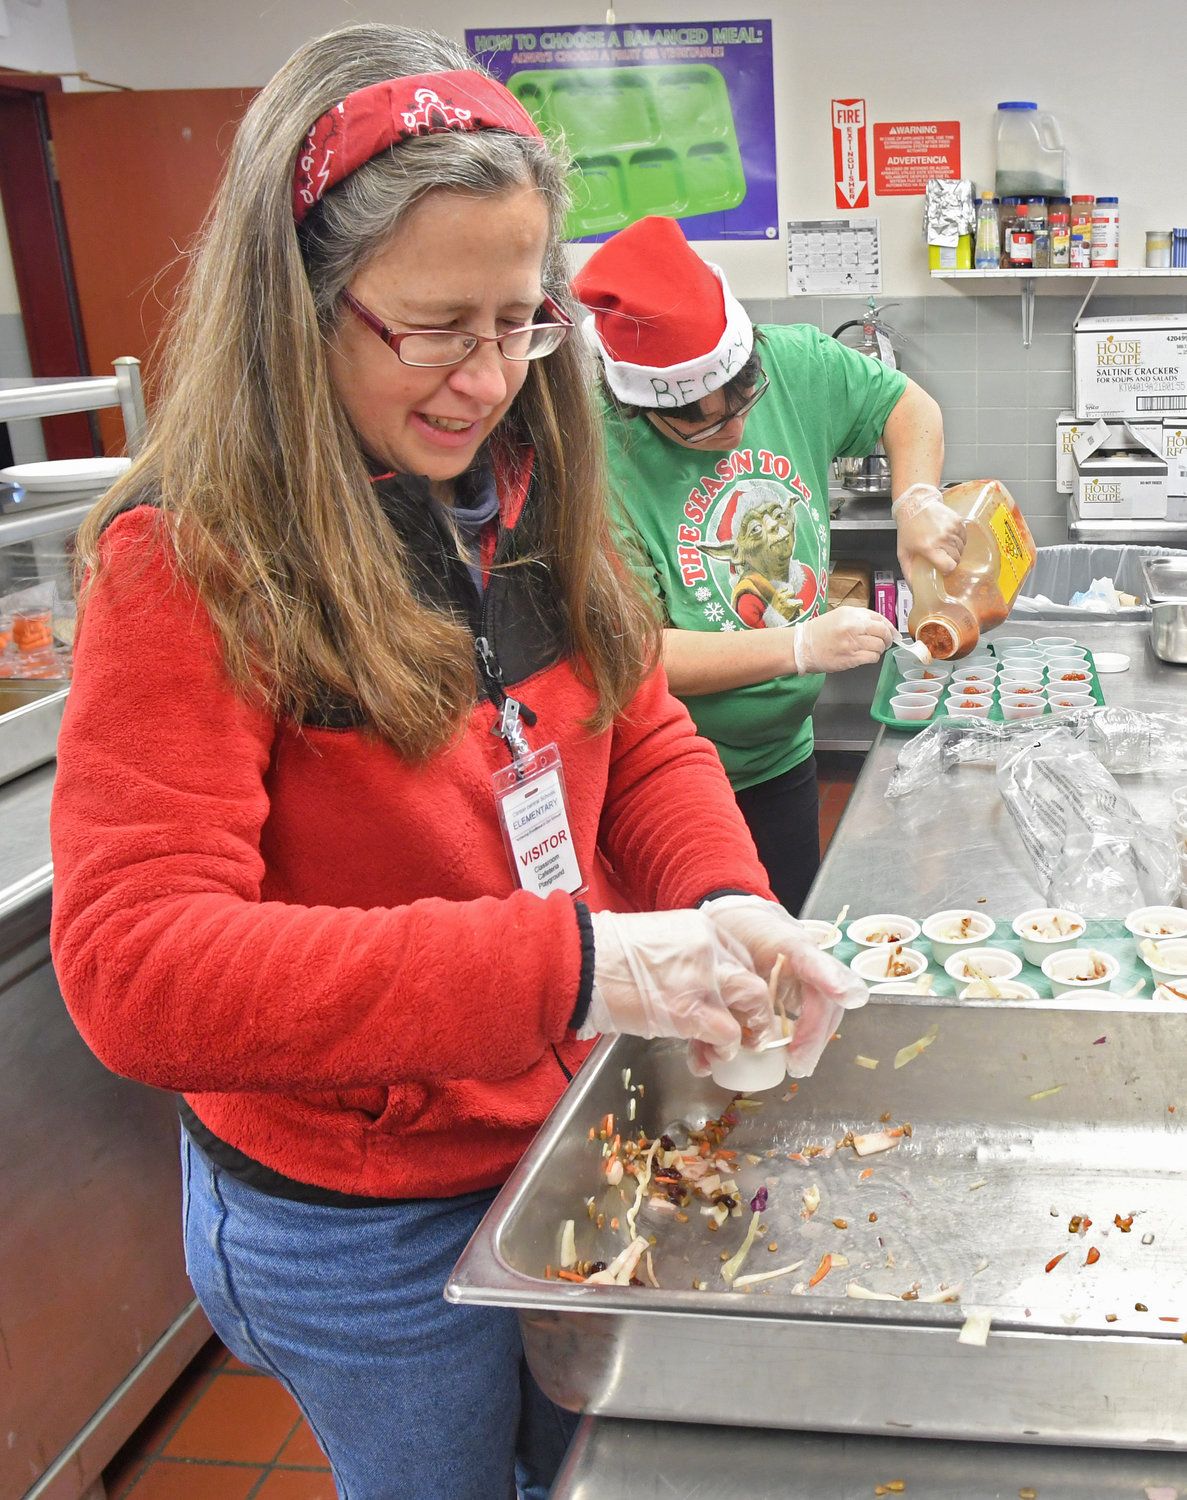 DISHING IT OUT — Clinton Elementary School parent volunteer Sarah McCullough dishes out Asian Cabbage Slaw into little cups for children to try during their lunch on Dec. 18 as part of the Harvest of the Month program.